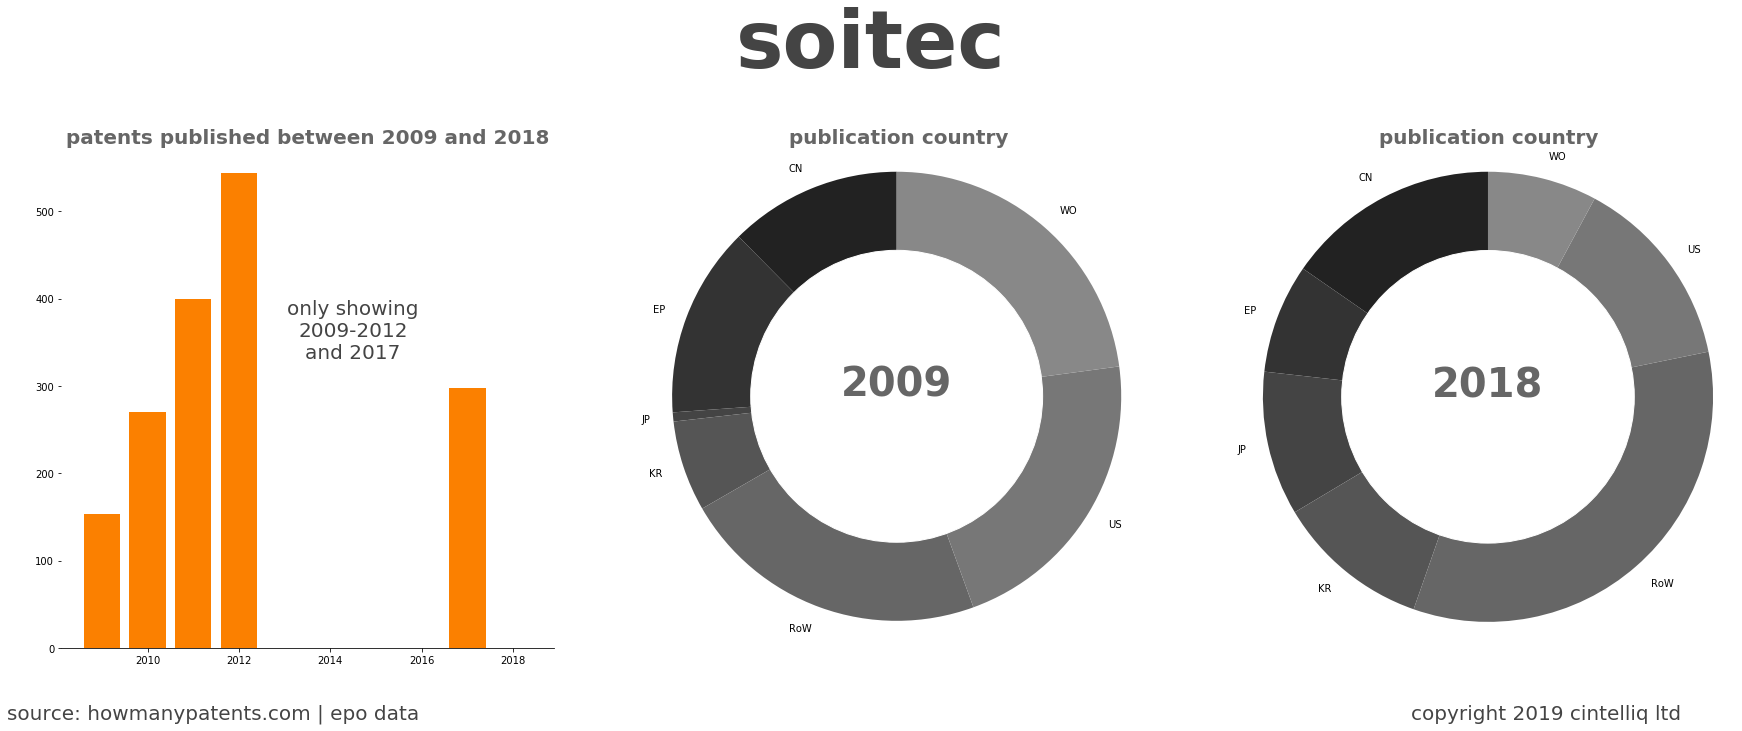 summary of patents for Soitec